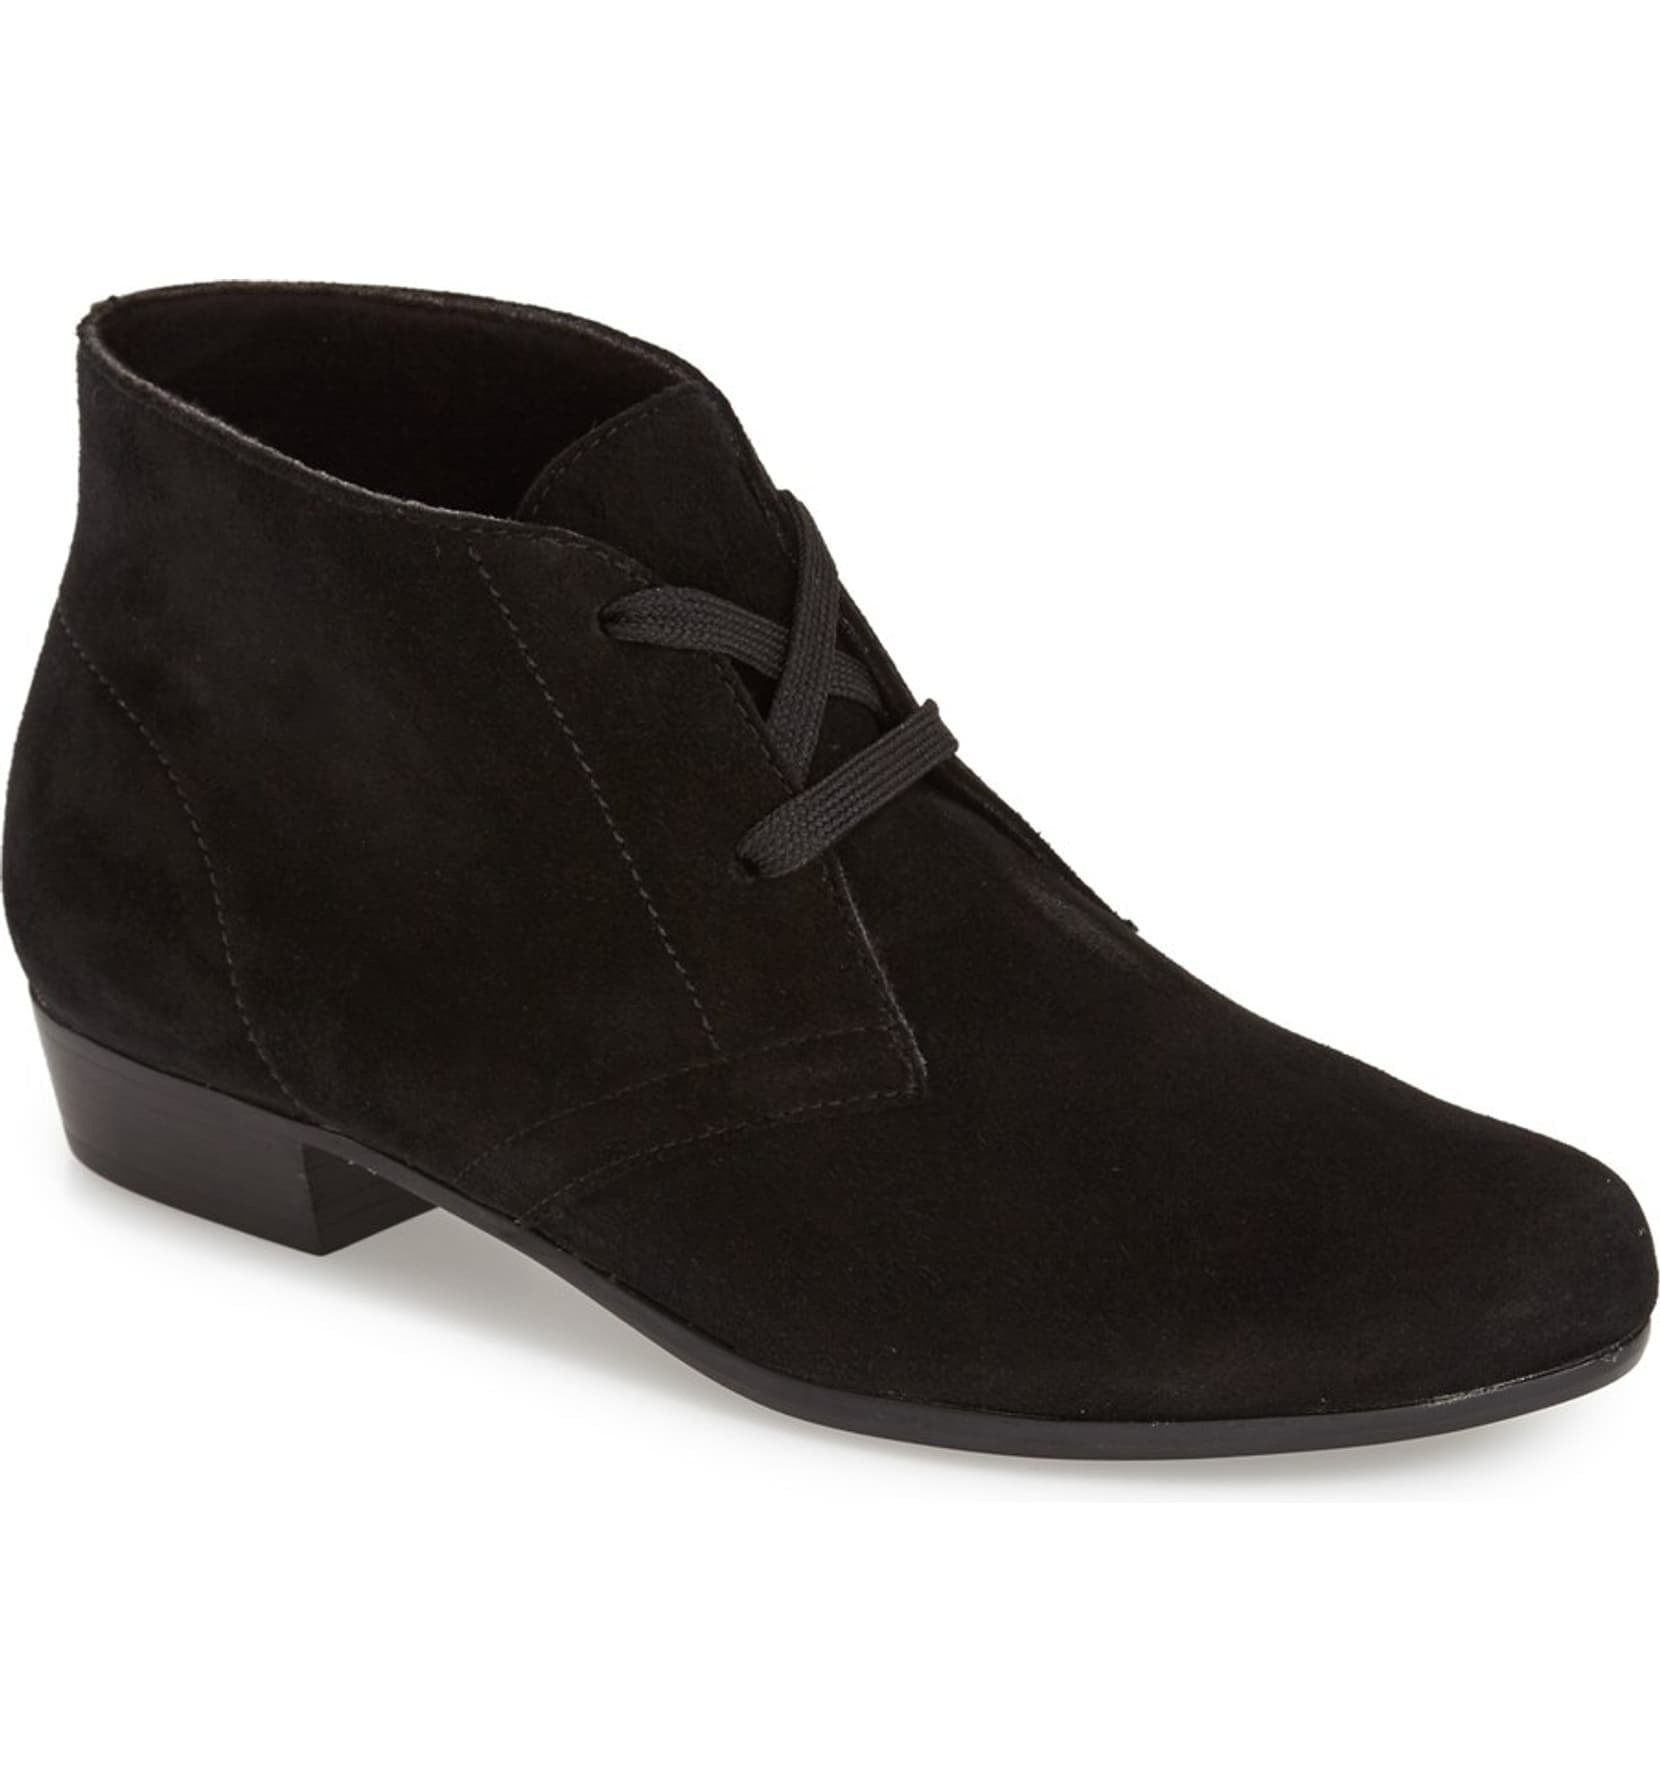 munro sloane lace up bootie